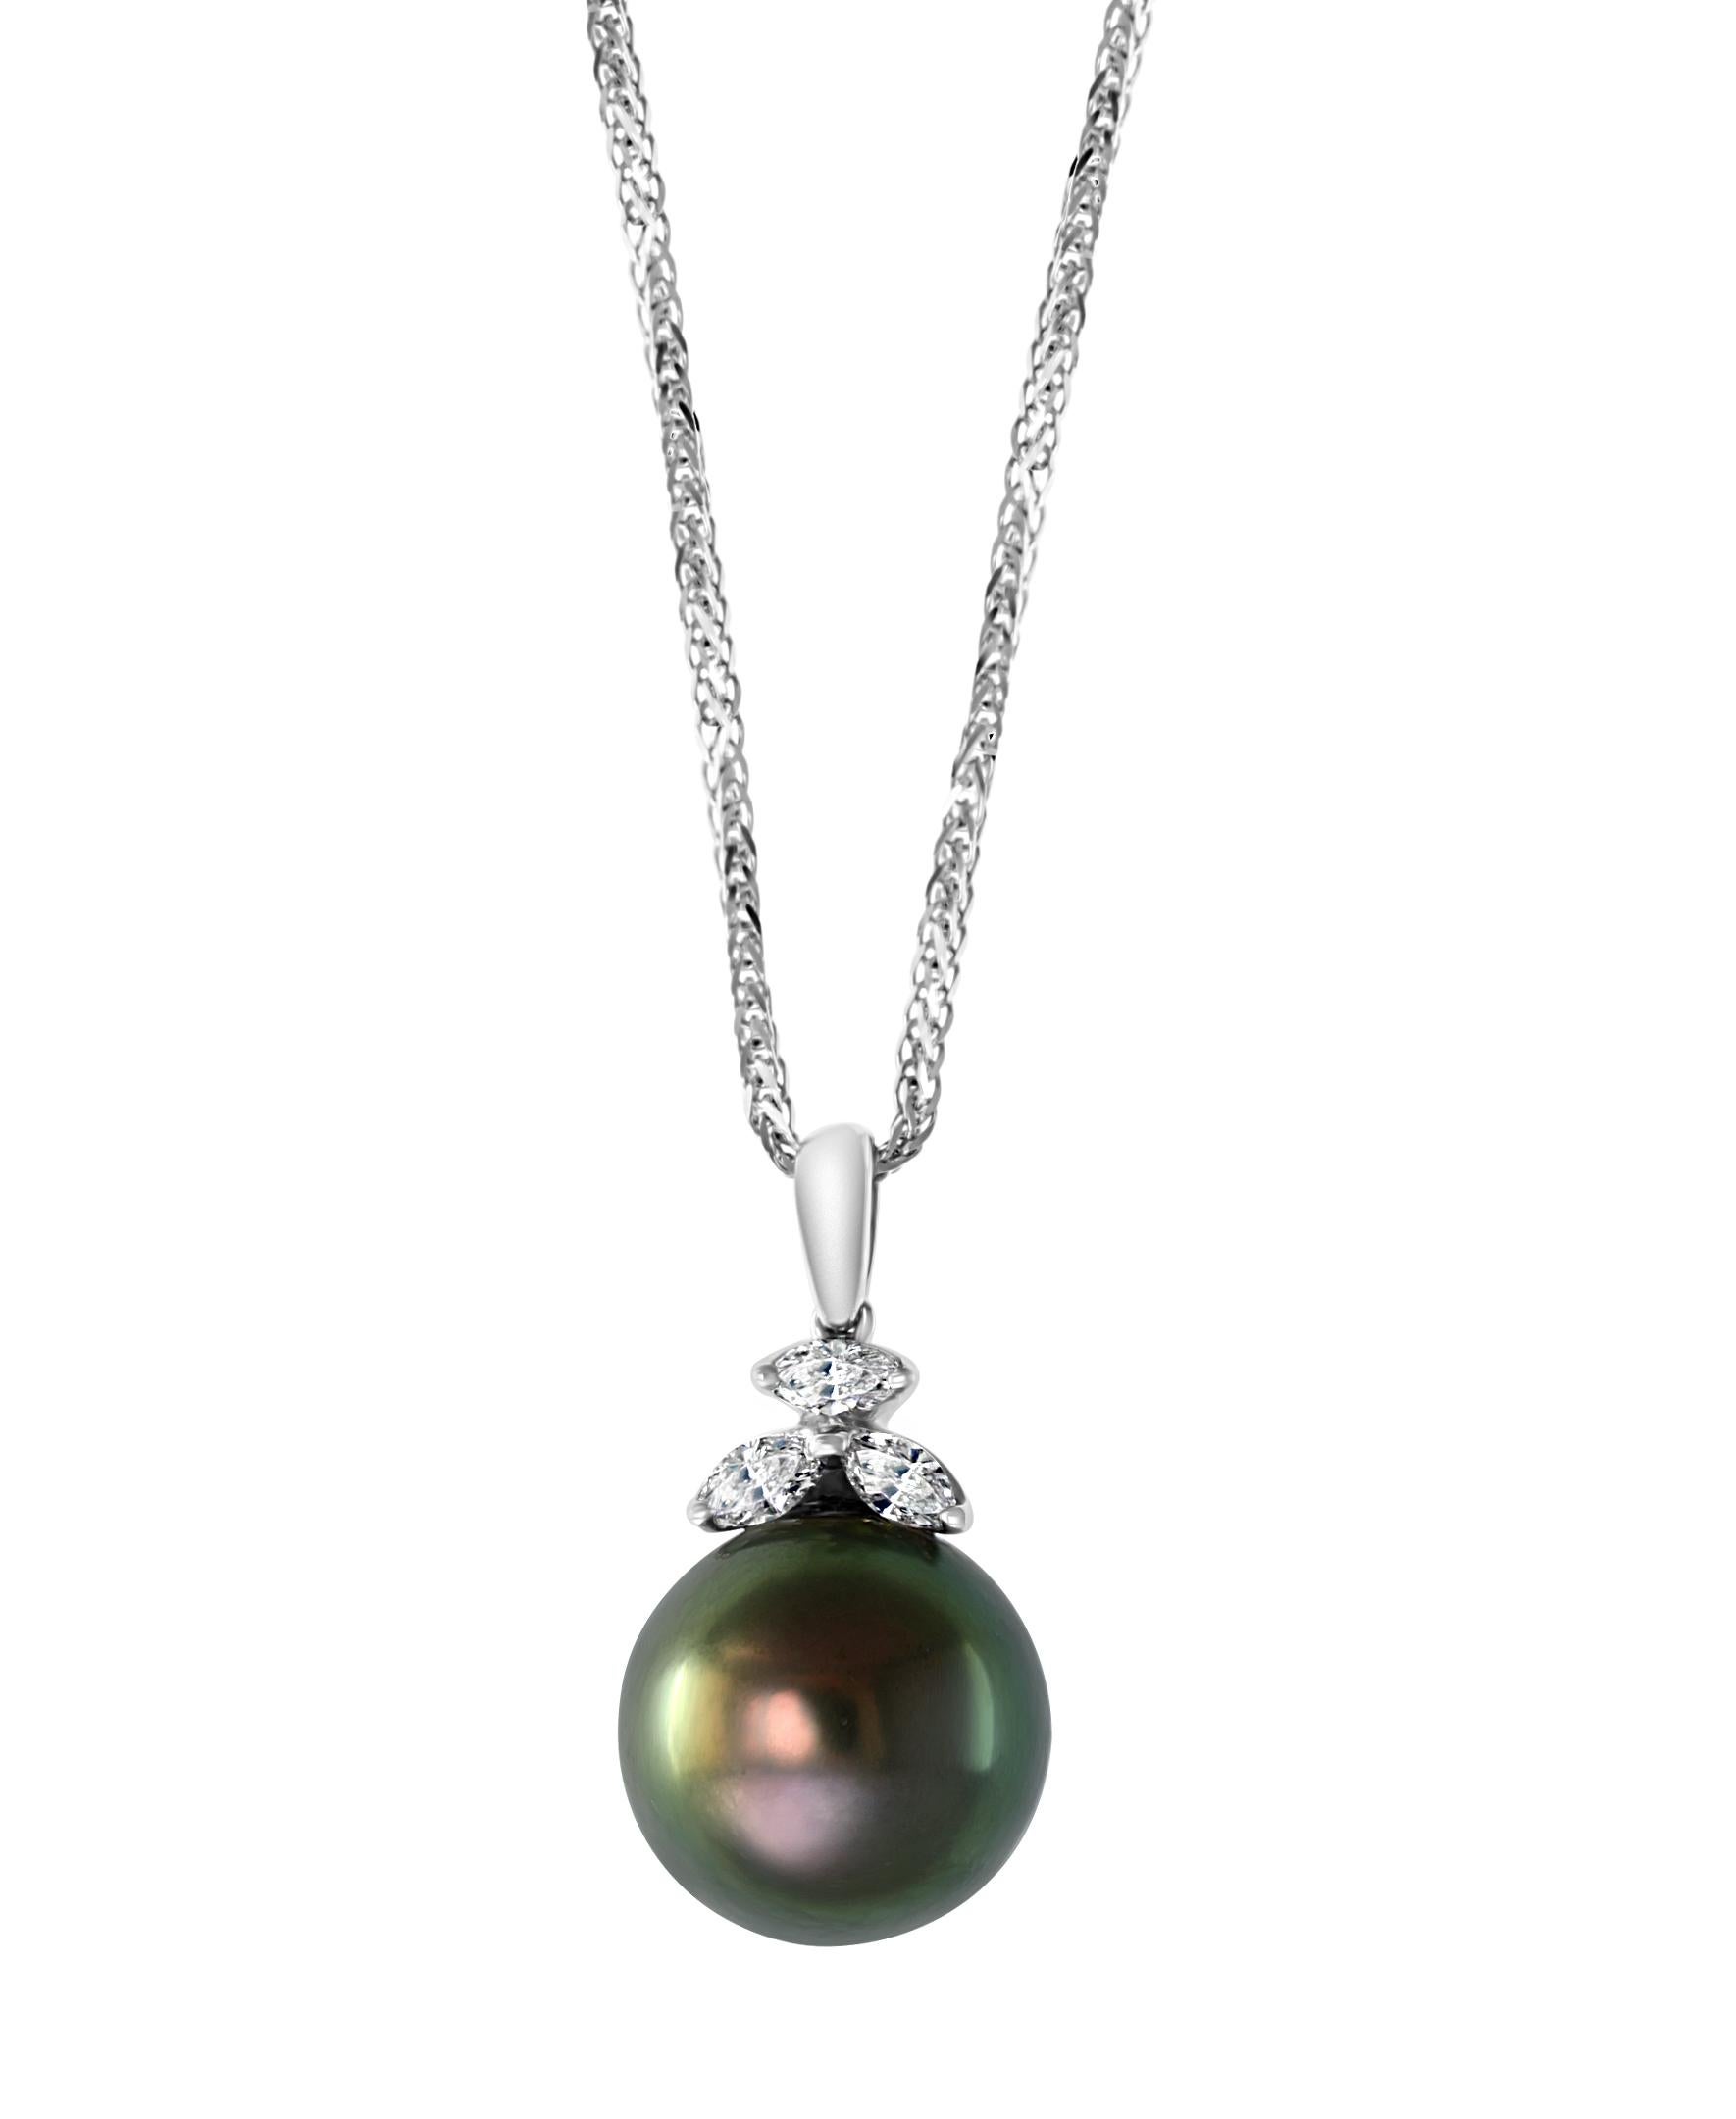 Black Tahitian Pearl and Diamond Pendant or Necklace 18 Karat Gold with ...